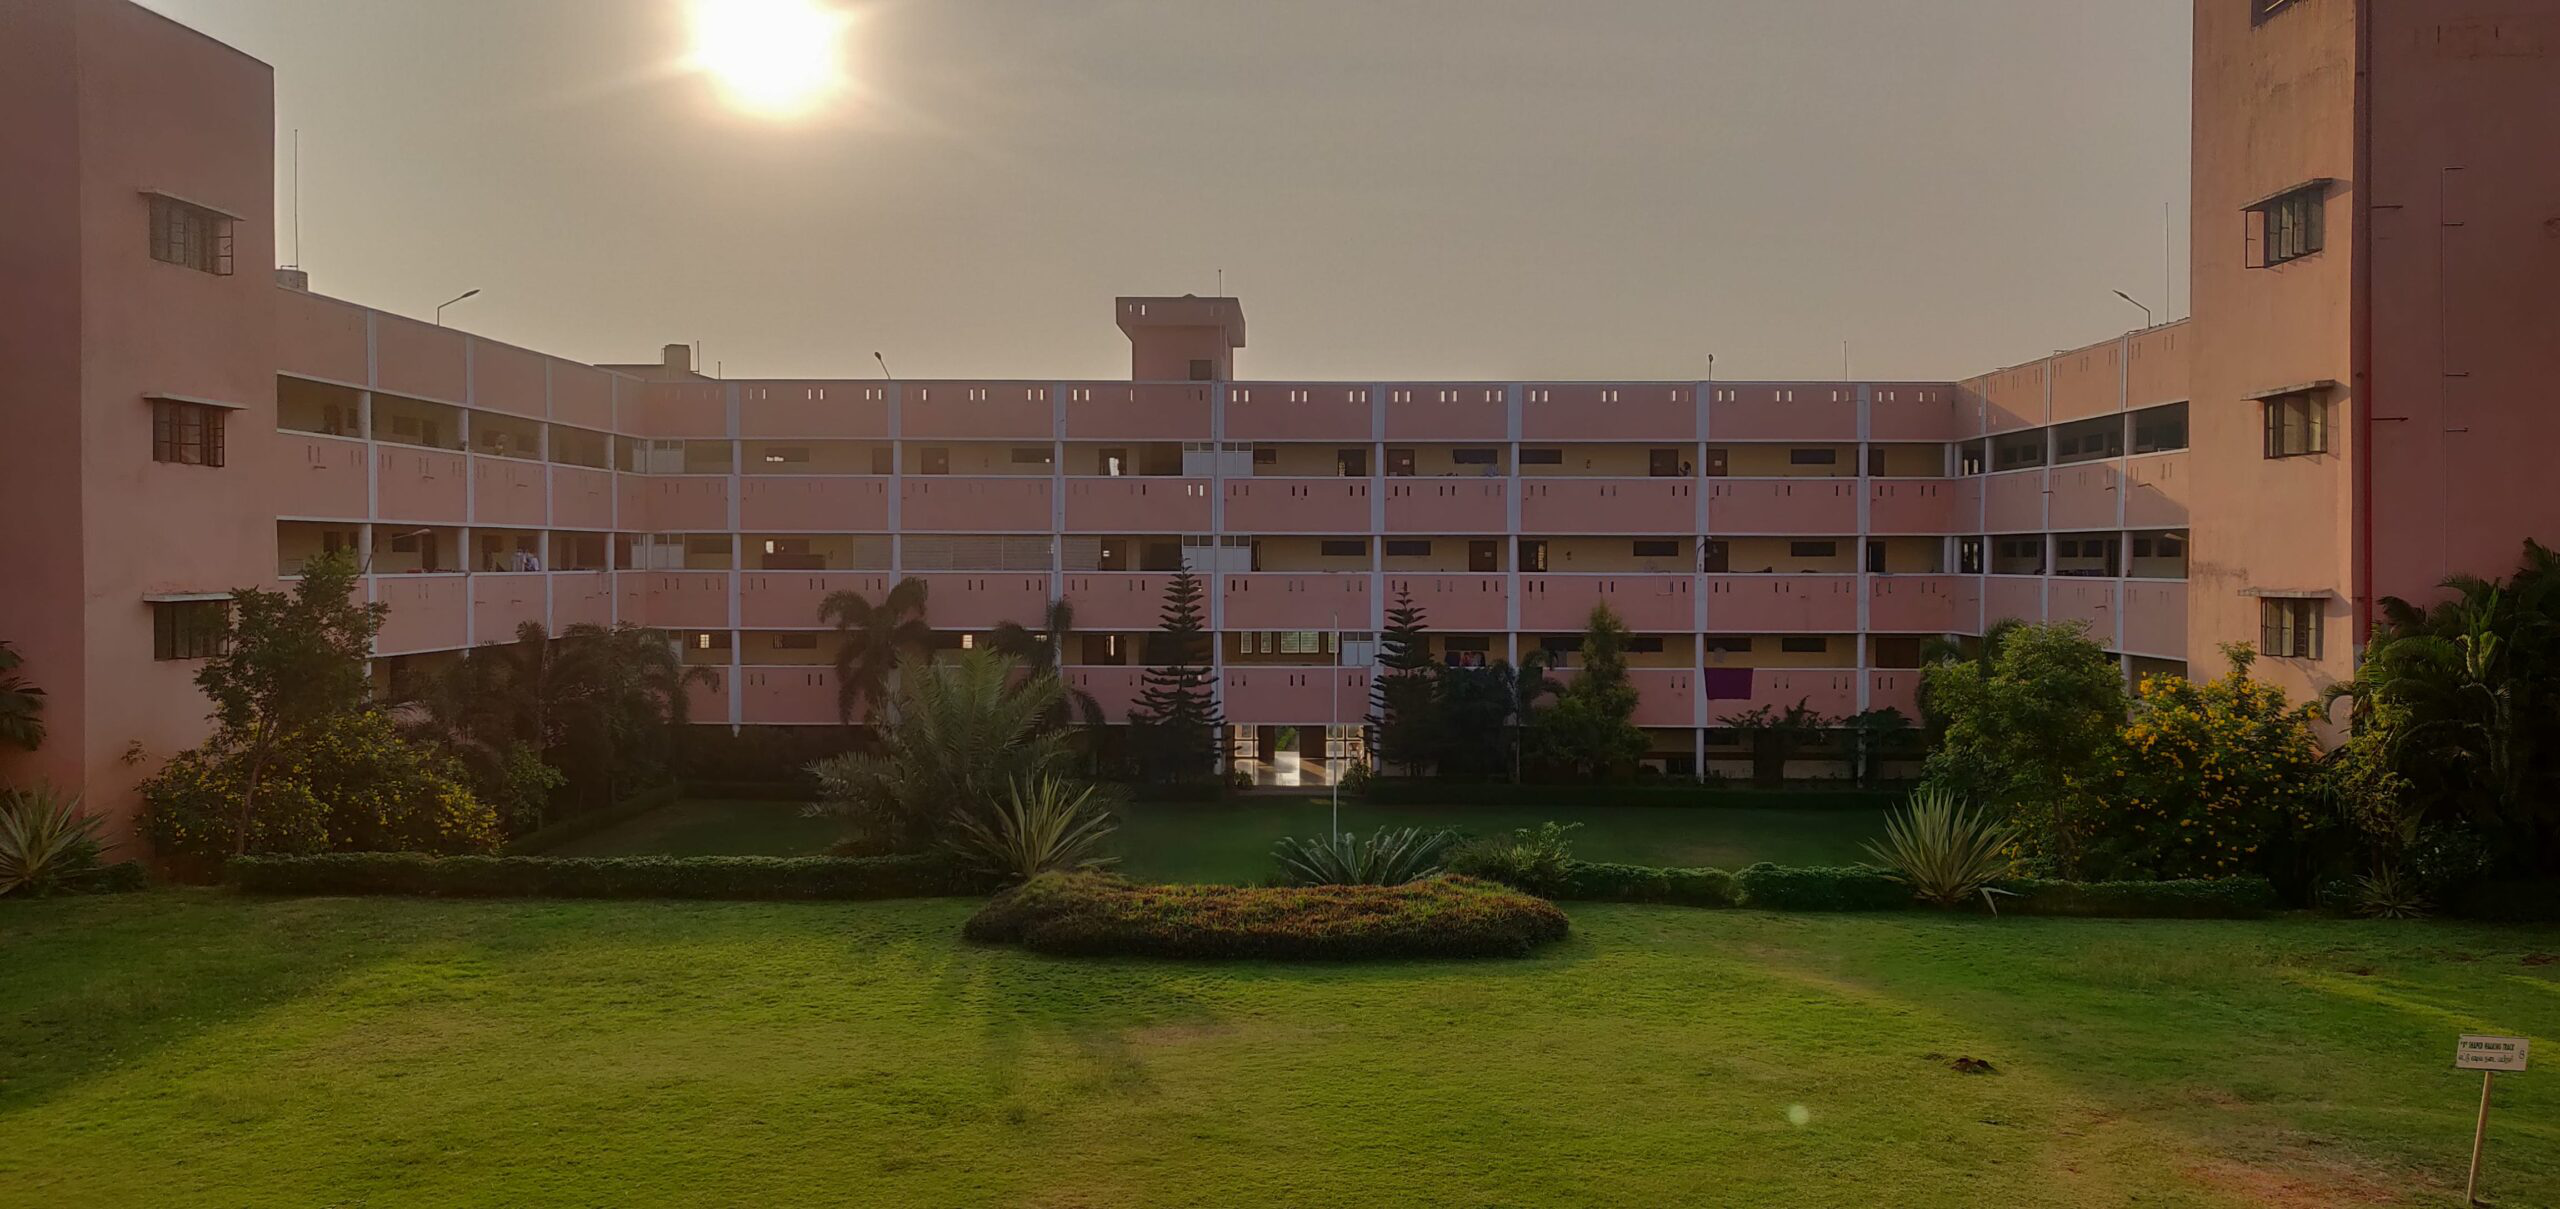 SMA Medical College of Naturopathy and Yogic Science Bhopal Admissions, Courses Offered, Fees